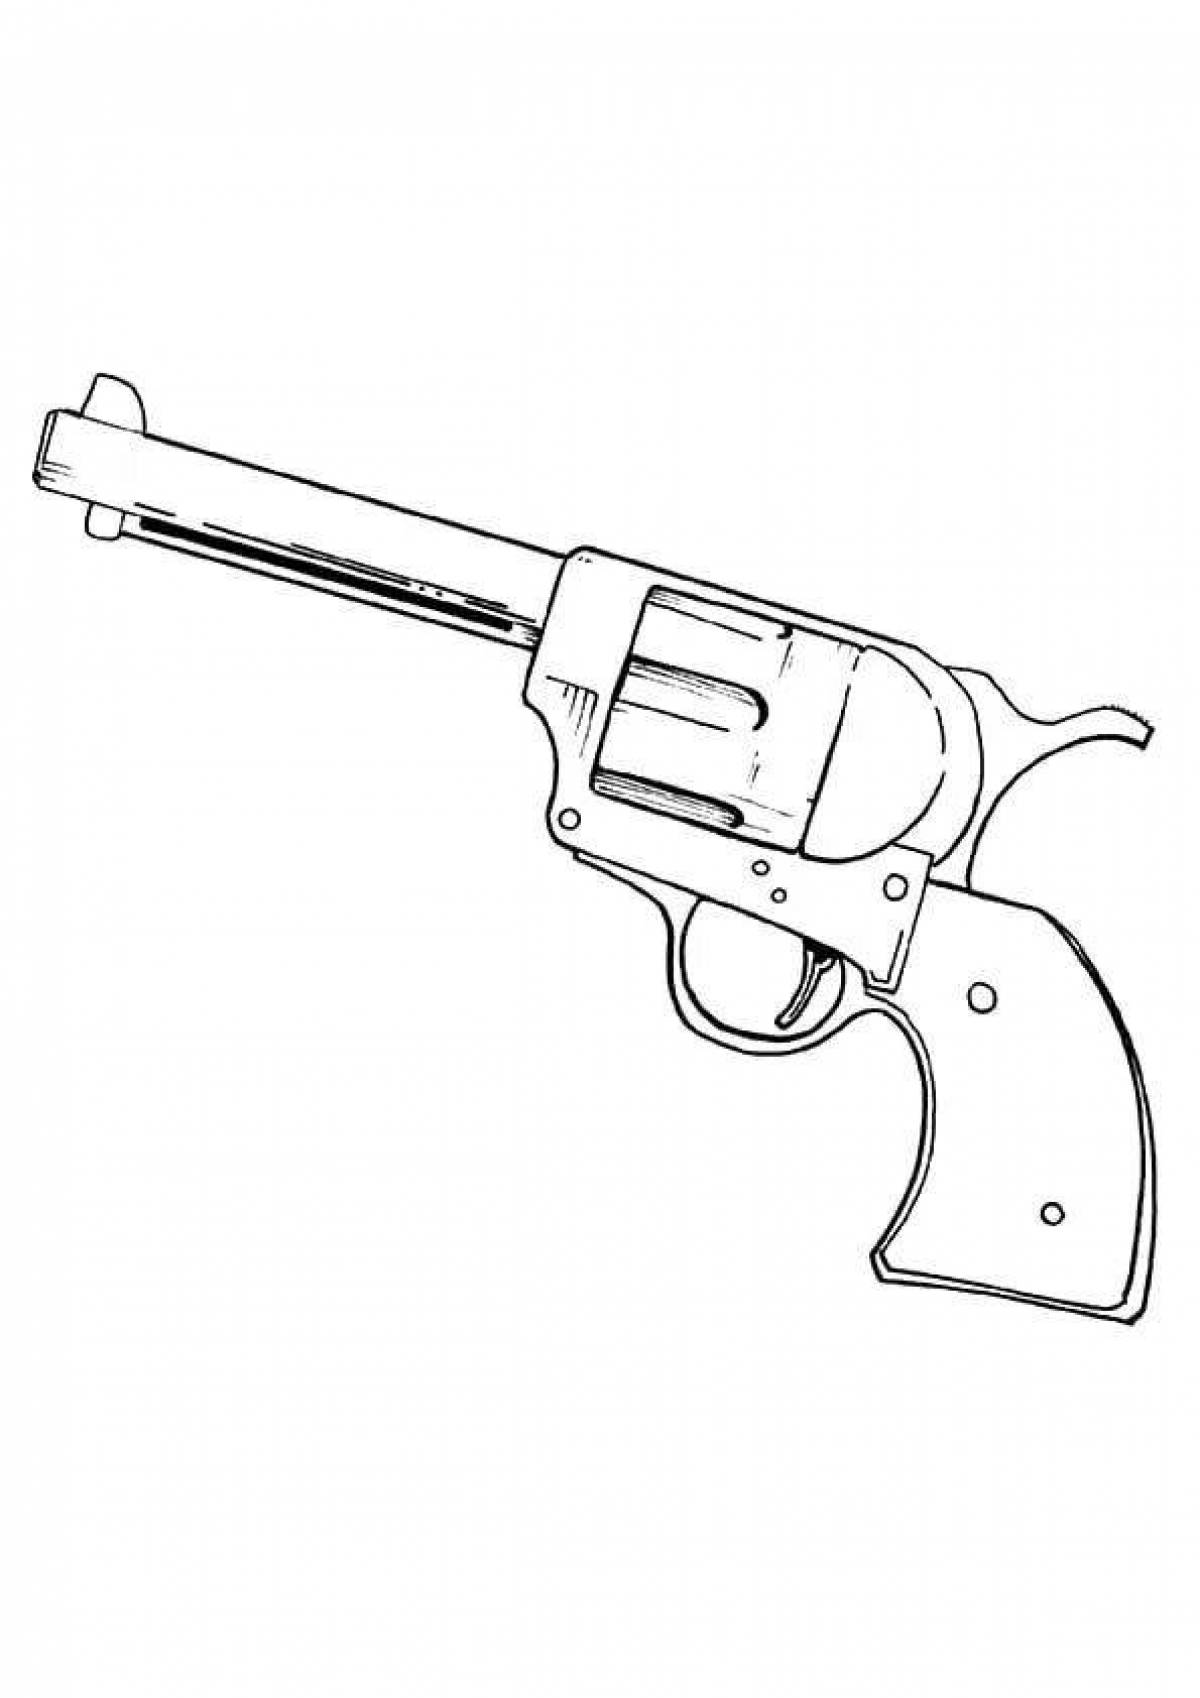 Tempting chicken gun coloring page for boys